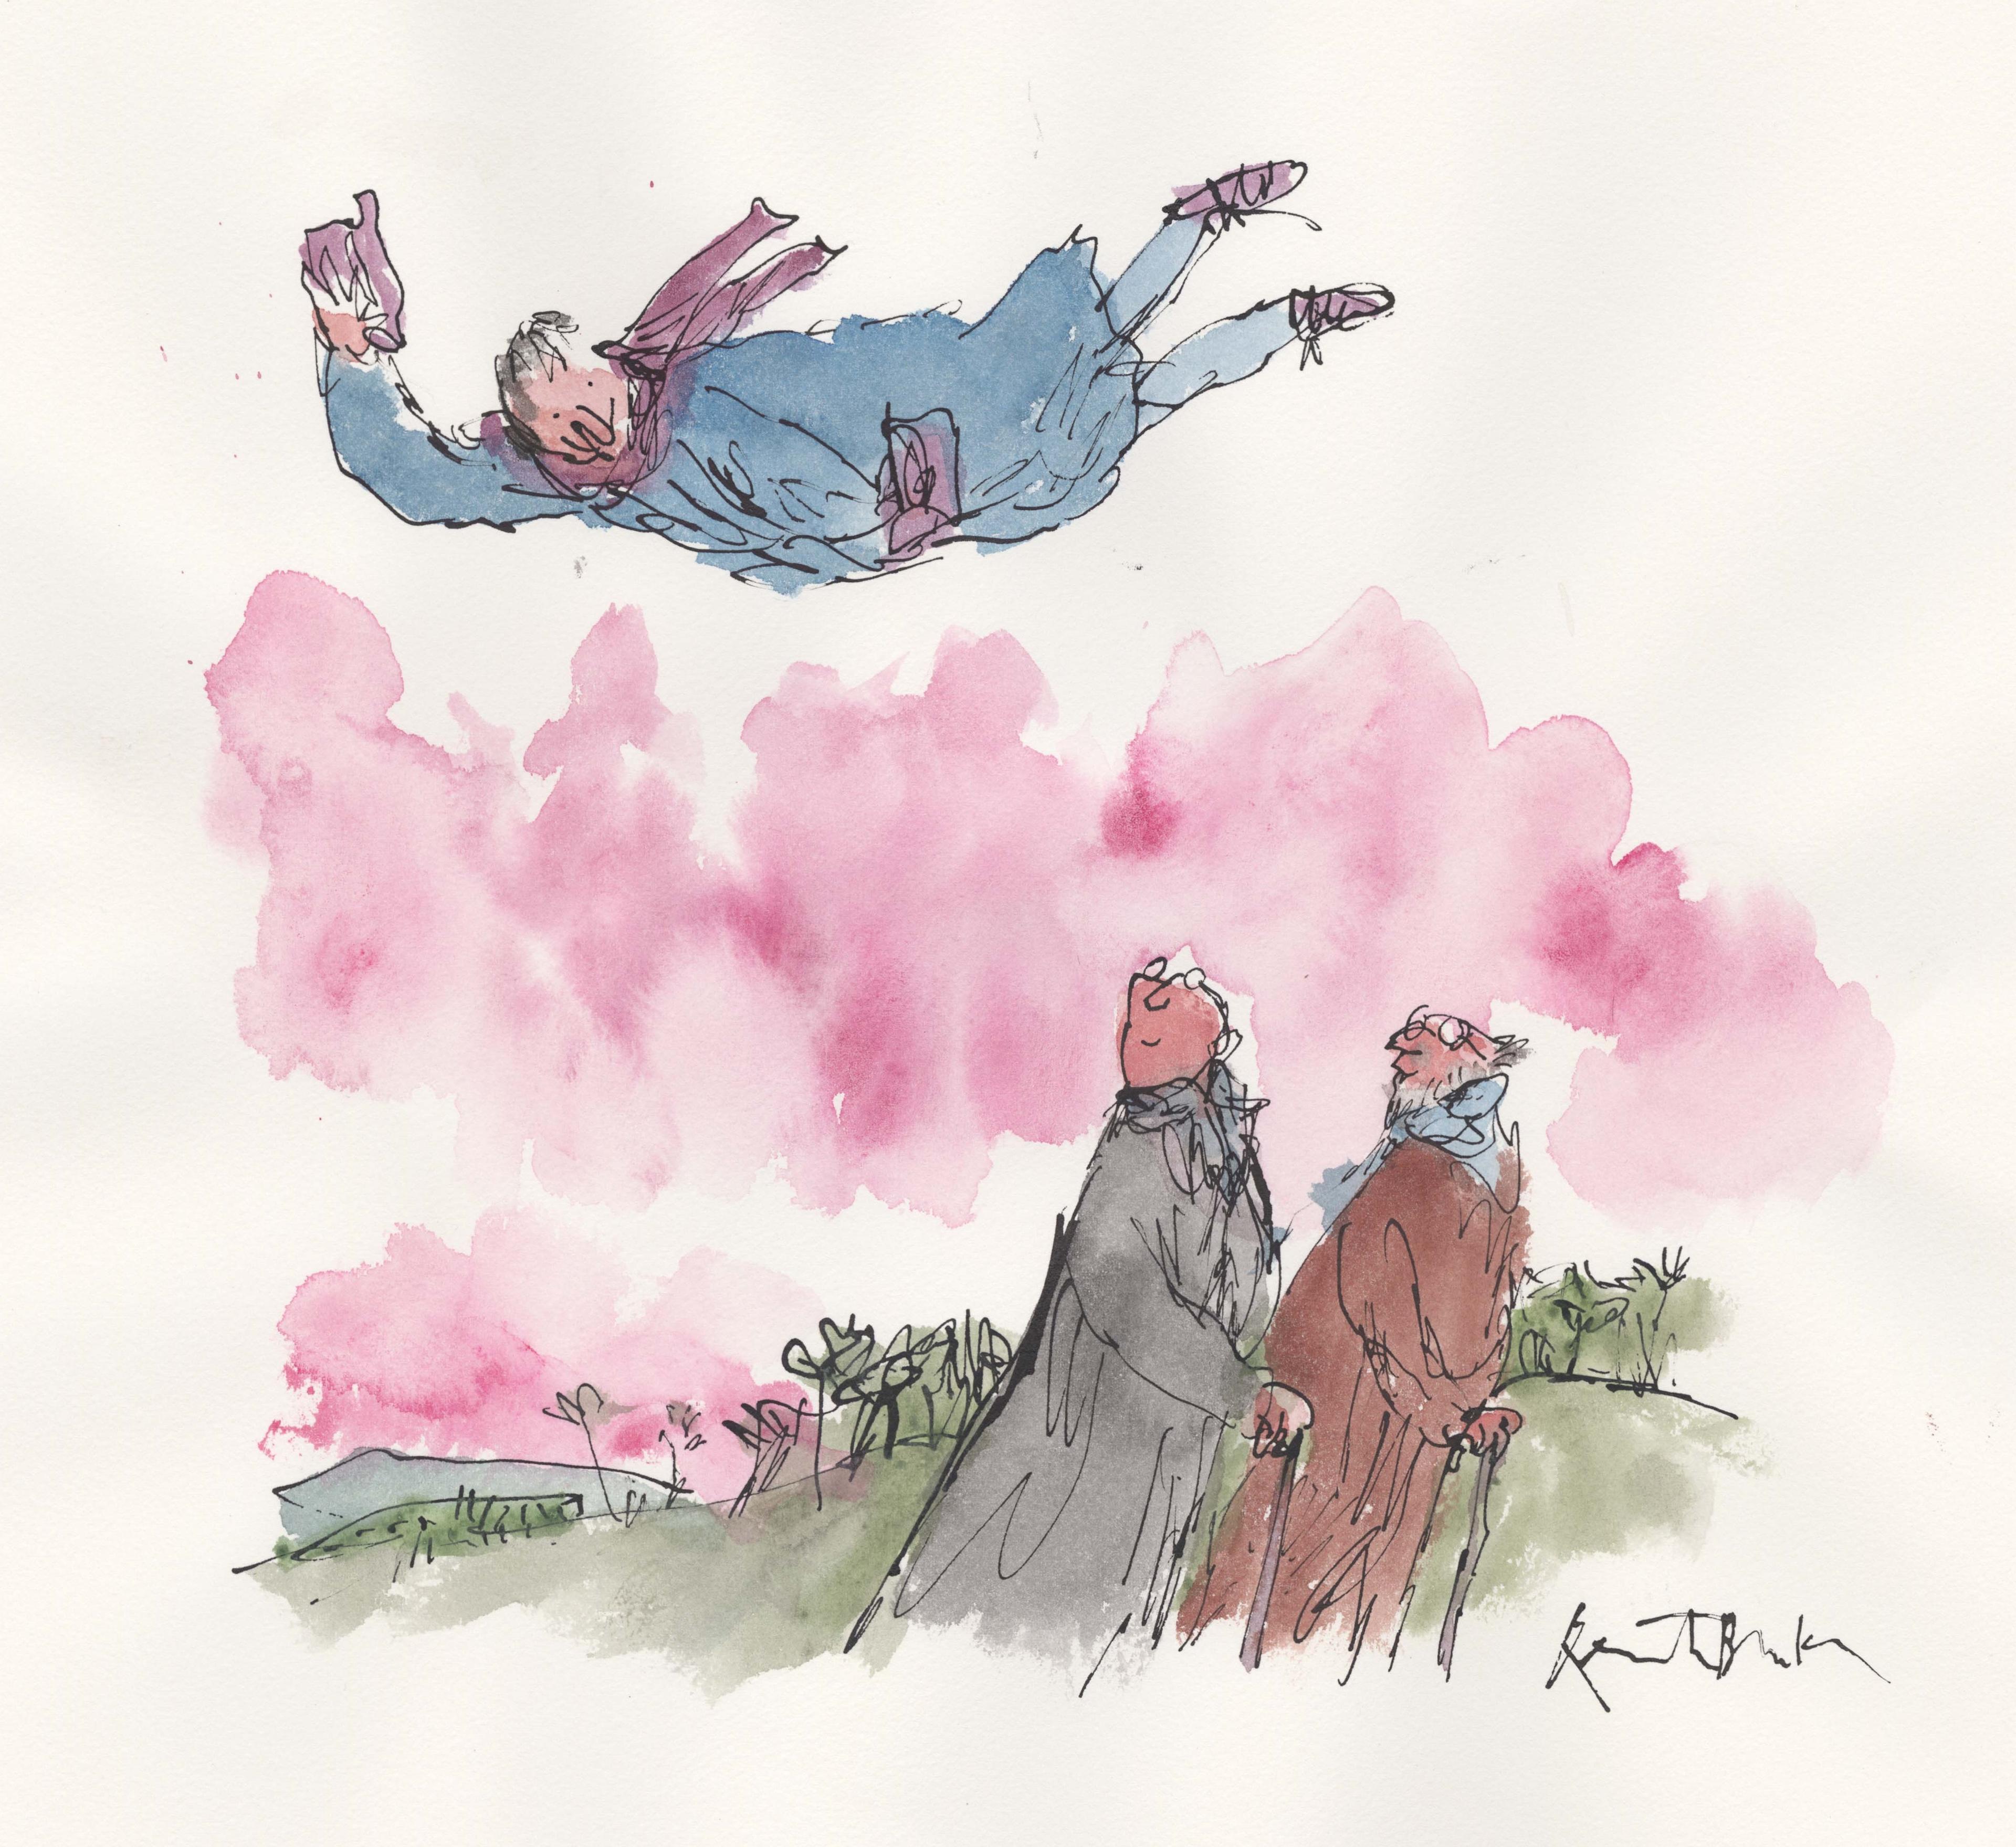 Illustration of a flying person raising their hat to two people walking below